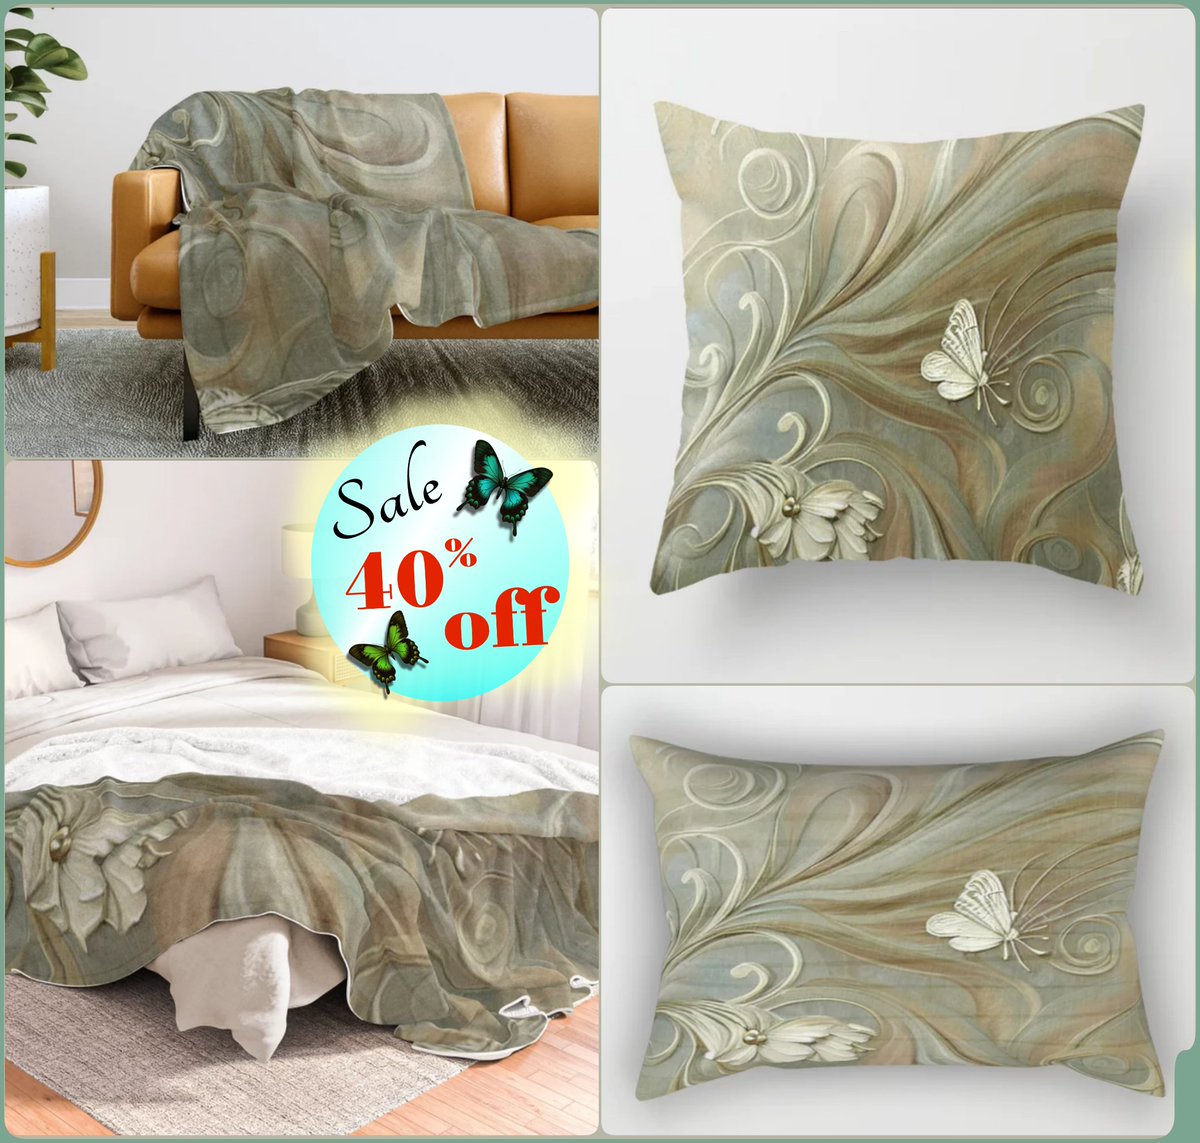 *SALE 40% Off*Today*
Wildly Sophisticated Throw Pillow~by Art Falaxy~
~Unique Pillows!~
#artfalaxy #art #bedroom #pillows #homedecor #society6 #Society6max #swirls #modern #trendy #accessories #accents #floorpillows #pillows #shams #blankets

society6.com/product/wildly……